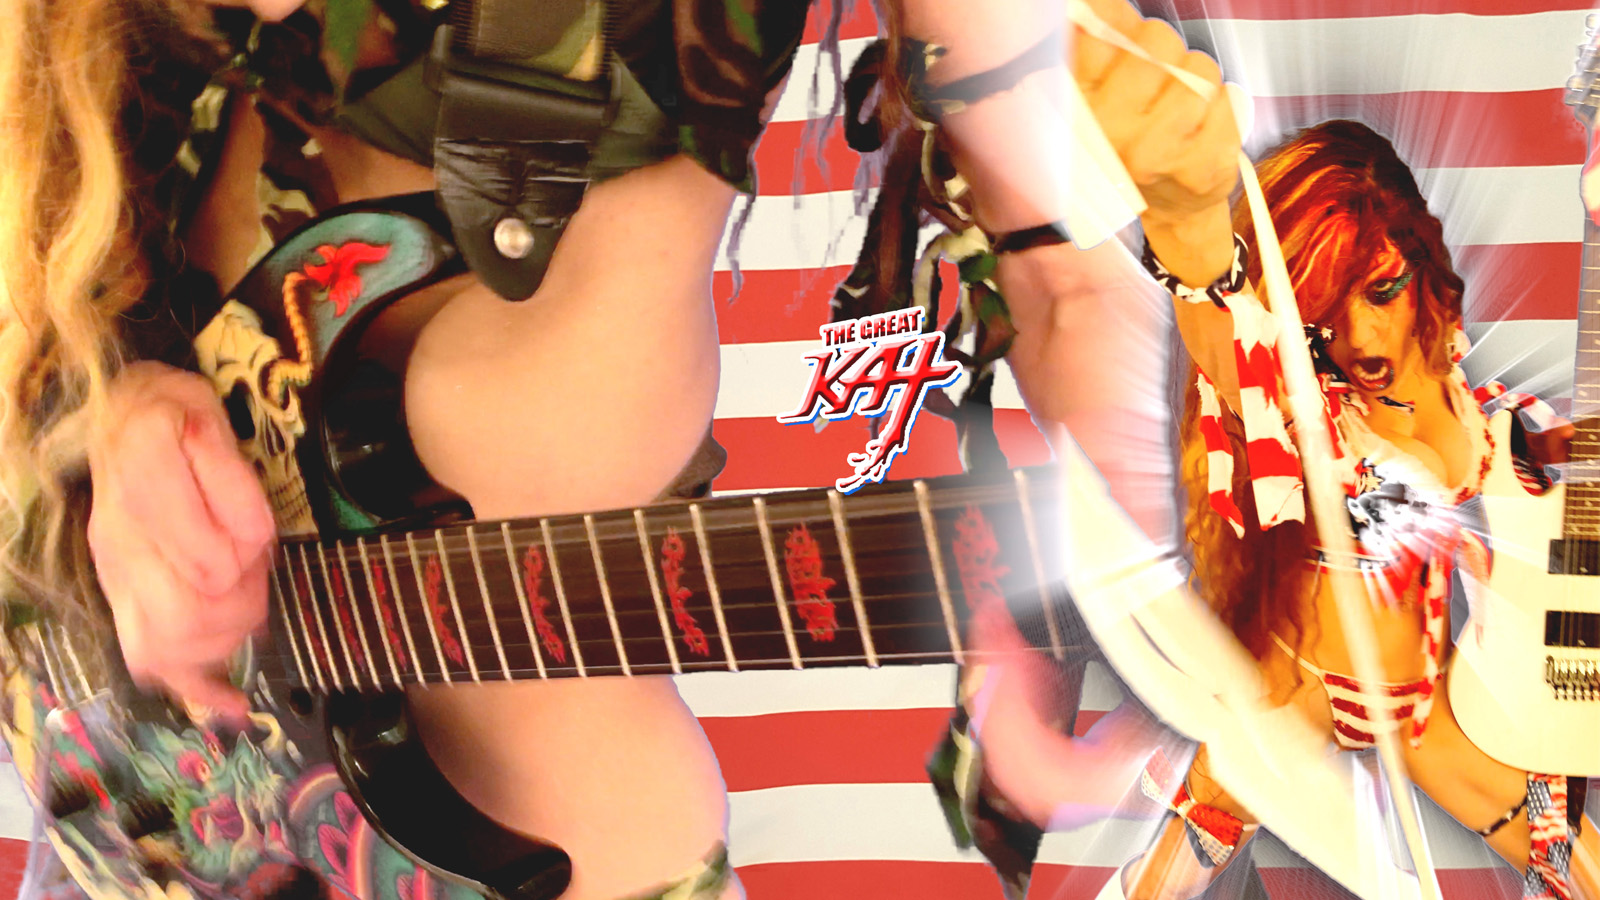 FIERCELY PATRIOTIC SHREDDER THE GREAT KAT!  From The Great Kat's "TERROR" MUSIC VIDEO!